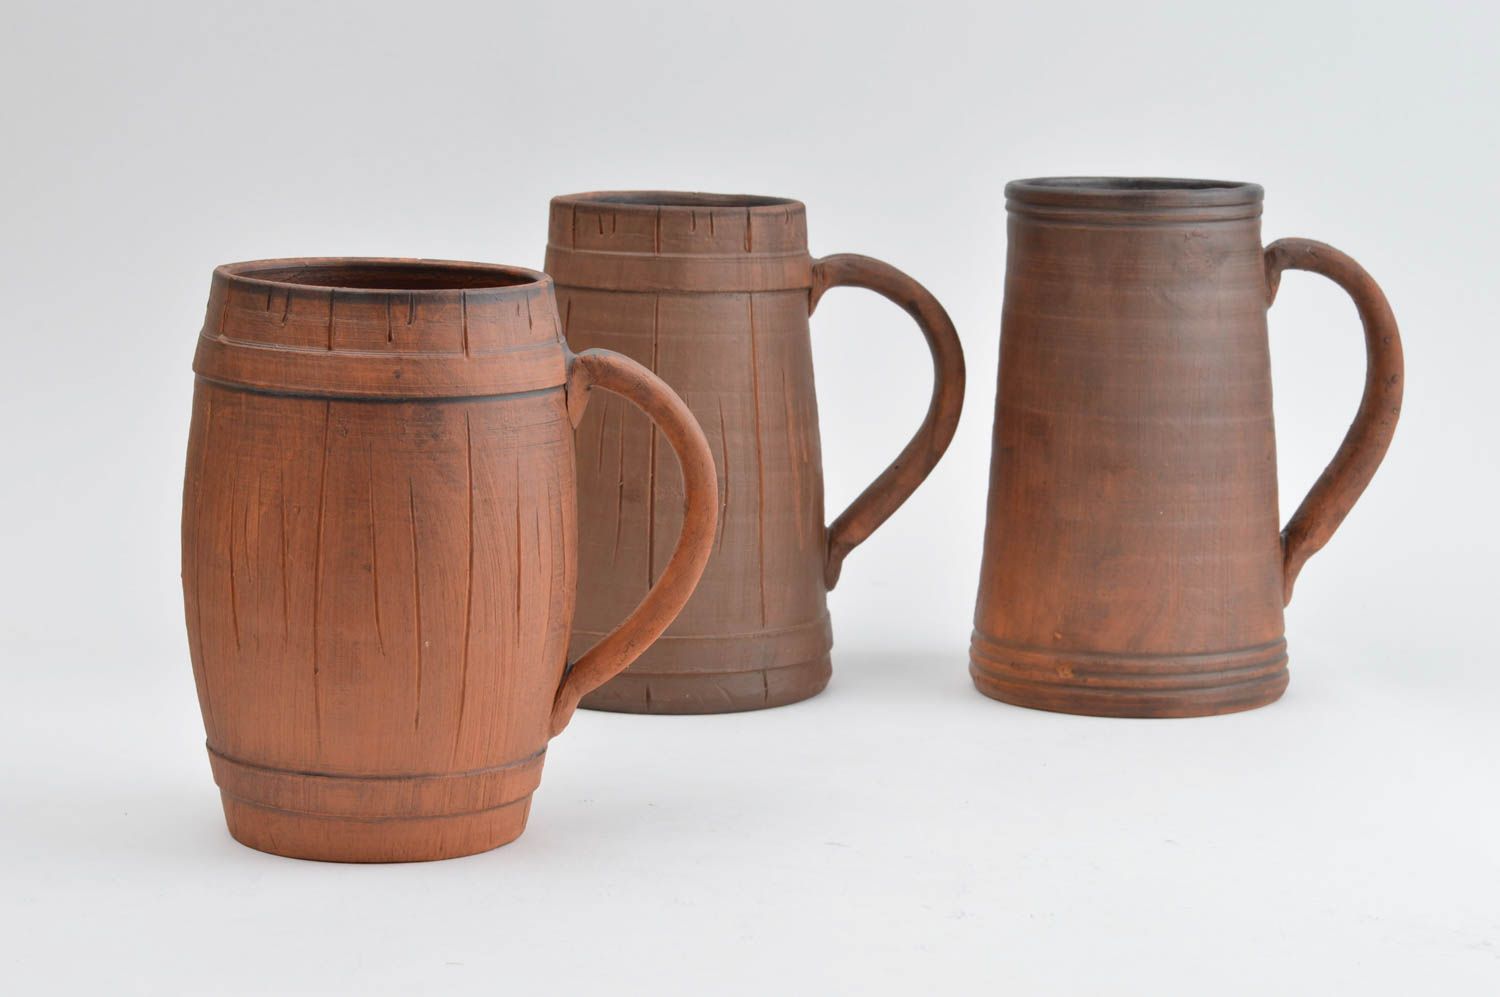 Set of 3 different clay beer mugs in German-style in dark brown color 4,46 lb photo 2